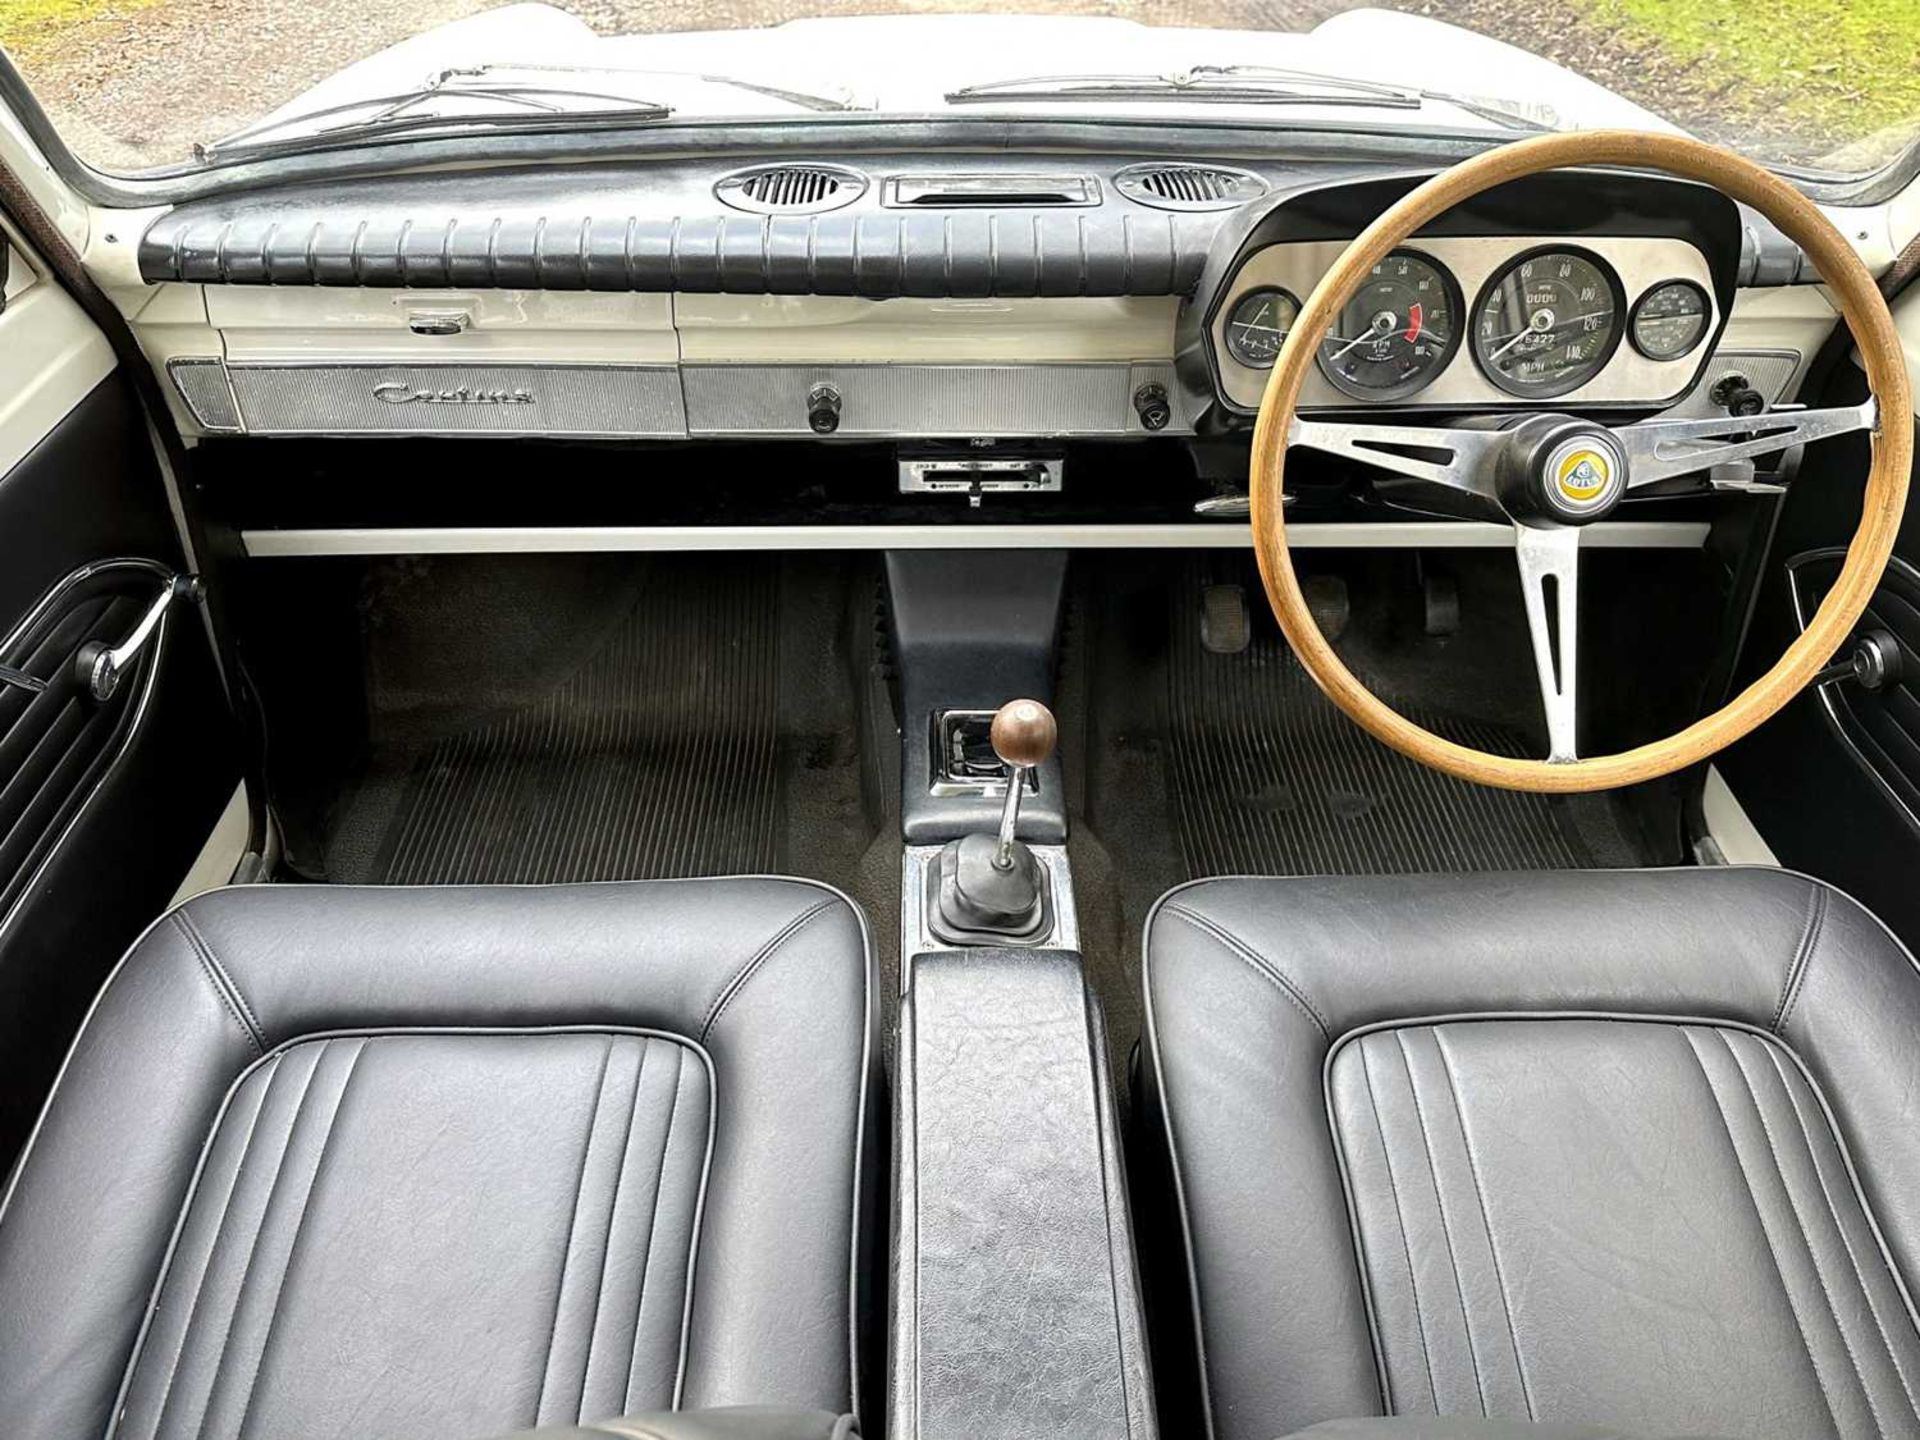 1963 Ford Lotus Cortina Pre-Aeroflow model, fitted with A-frame rear suspension - Image 30 of 58